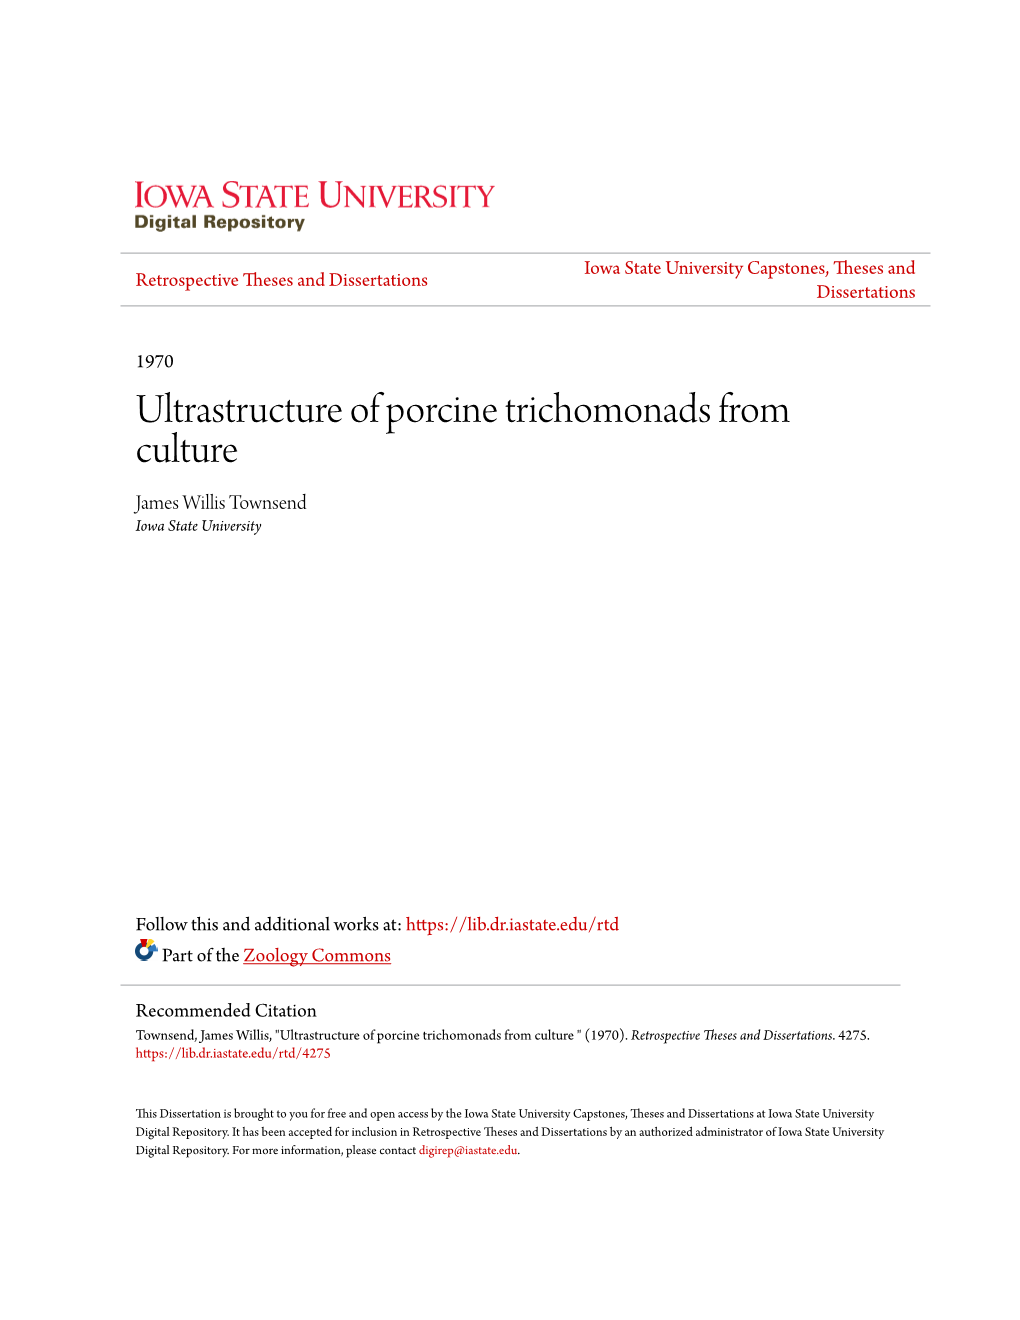 Ultrastructure of Porcine Trichomonads from Culture James Willis Townsend Iowa State University